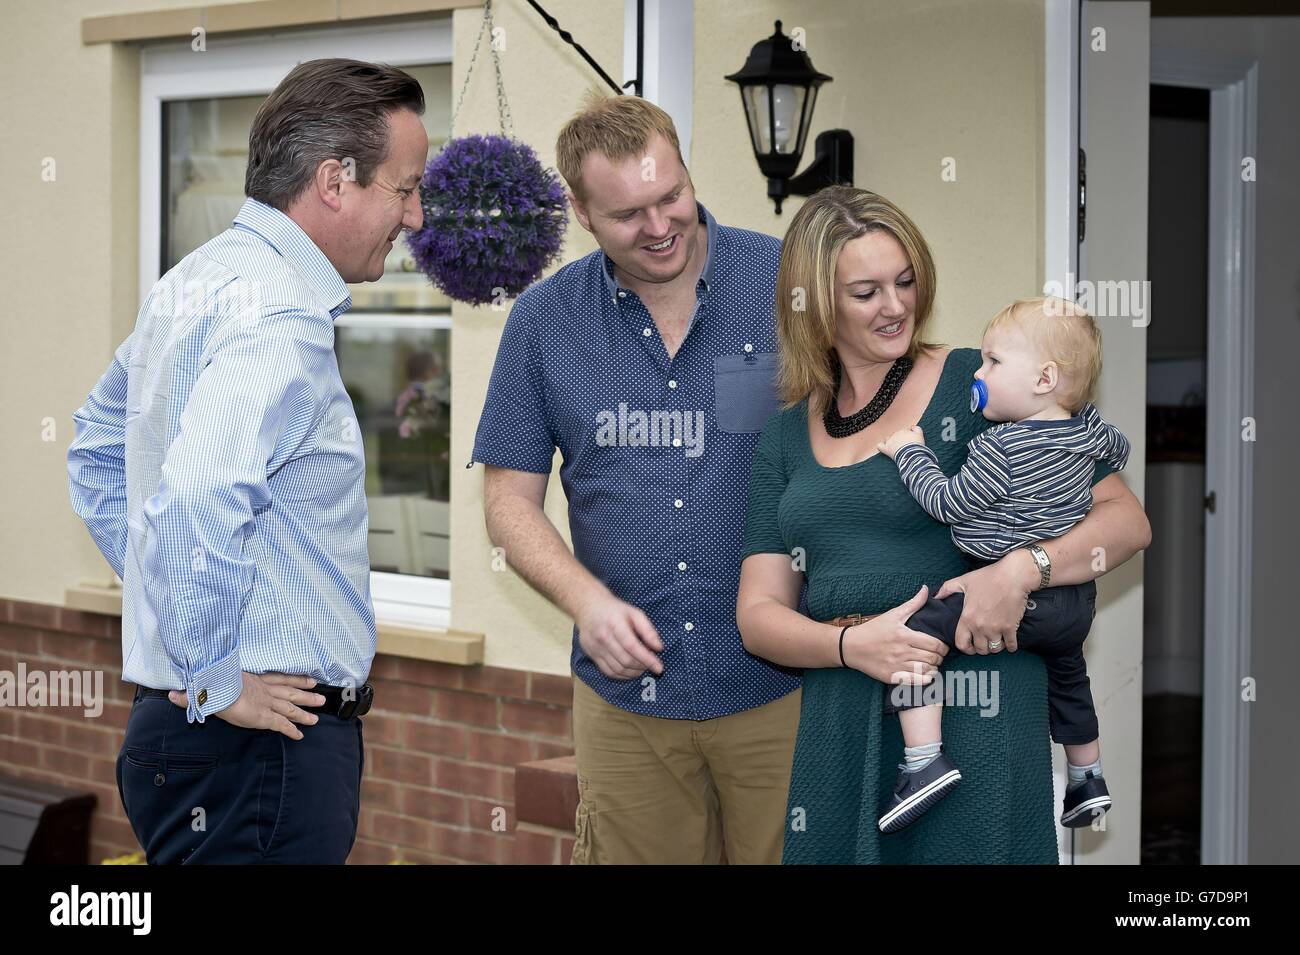 Prime Minister David Cameron meets Barry and Samantha McBeth and their one year old Alfie during a visit to the new Taylor Wimpy Great Western Park housing estate, Didcot, Oxfordshire ahead of the start of the Conservative Party Conference. Stock Photo